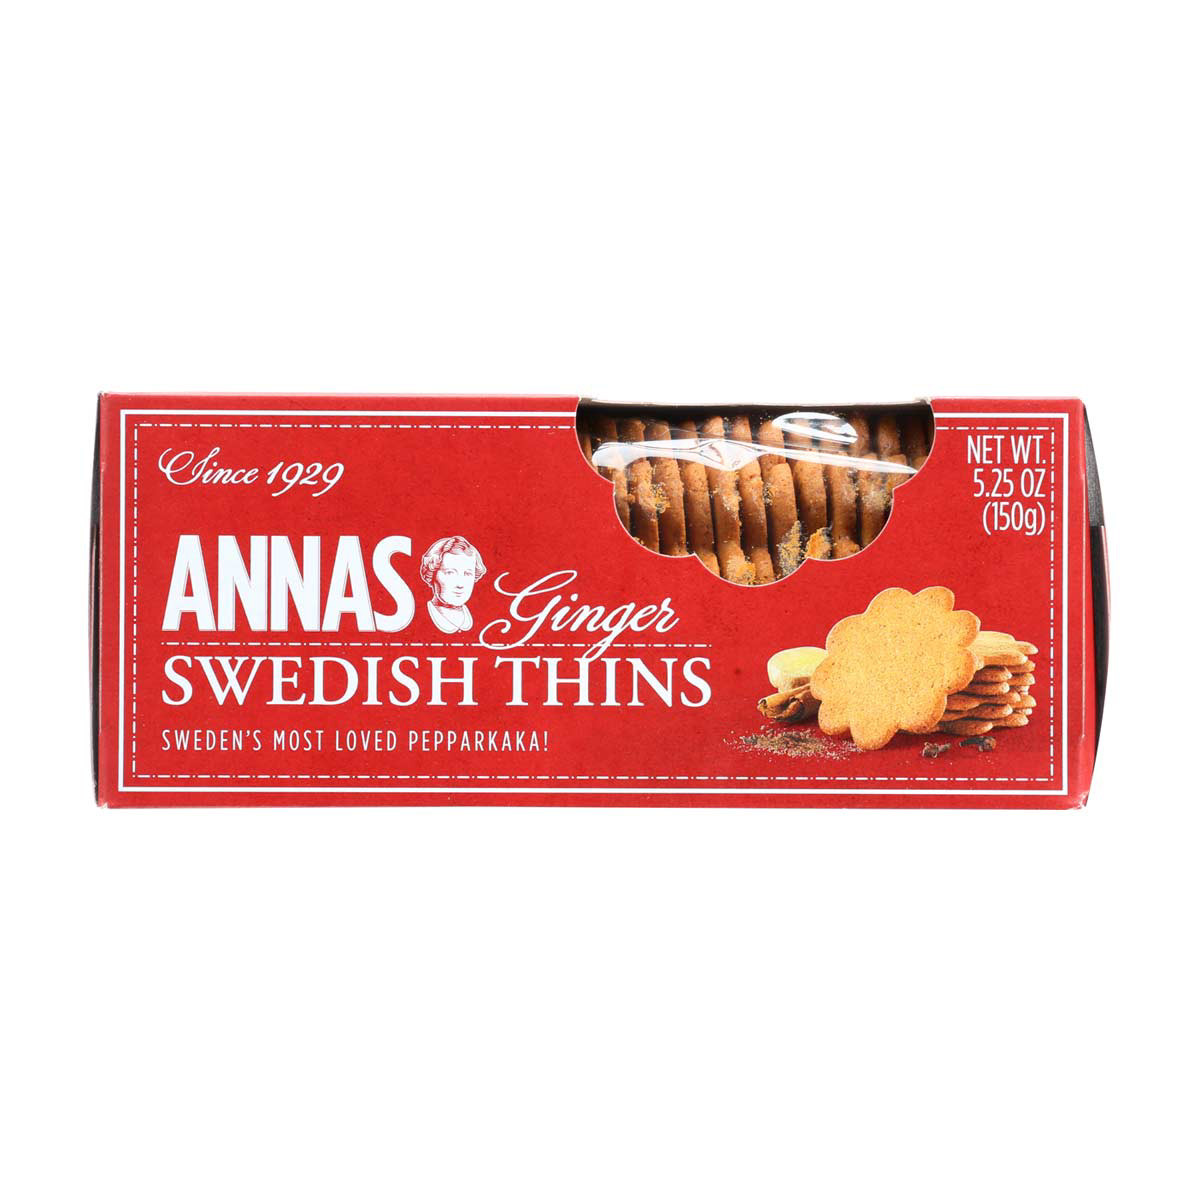 Anna's Ginger Swedish Thins Cookies, 5.25 oz.